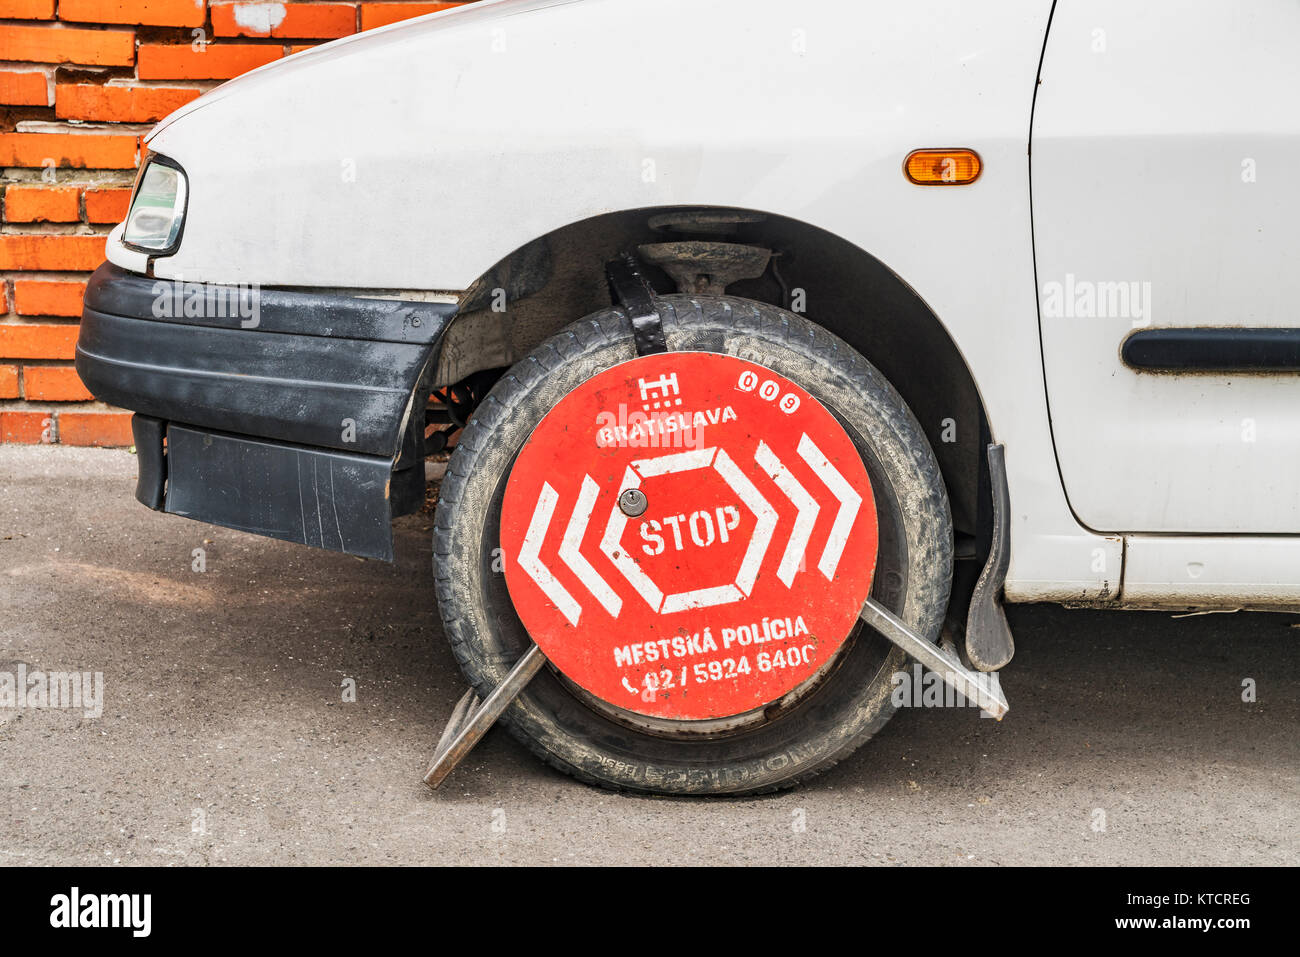 A car in the parking prohibition zone is secured with a wheel clamp, Bratislava, Slovakia, Europe Stock Photo